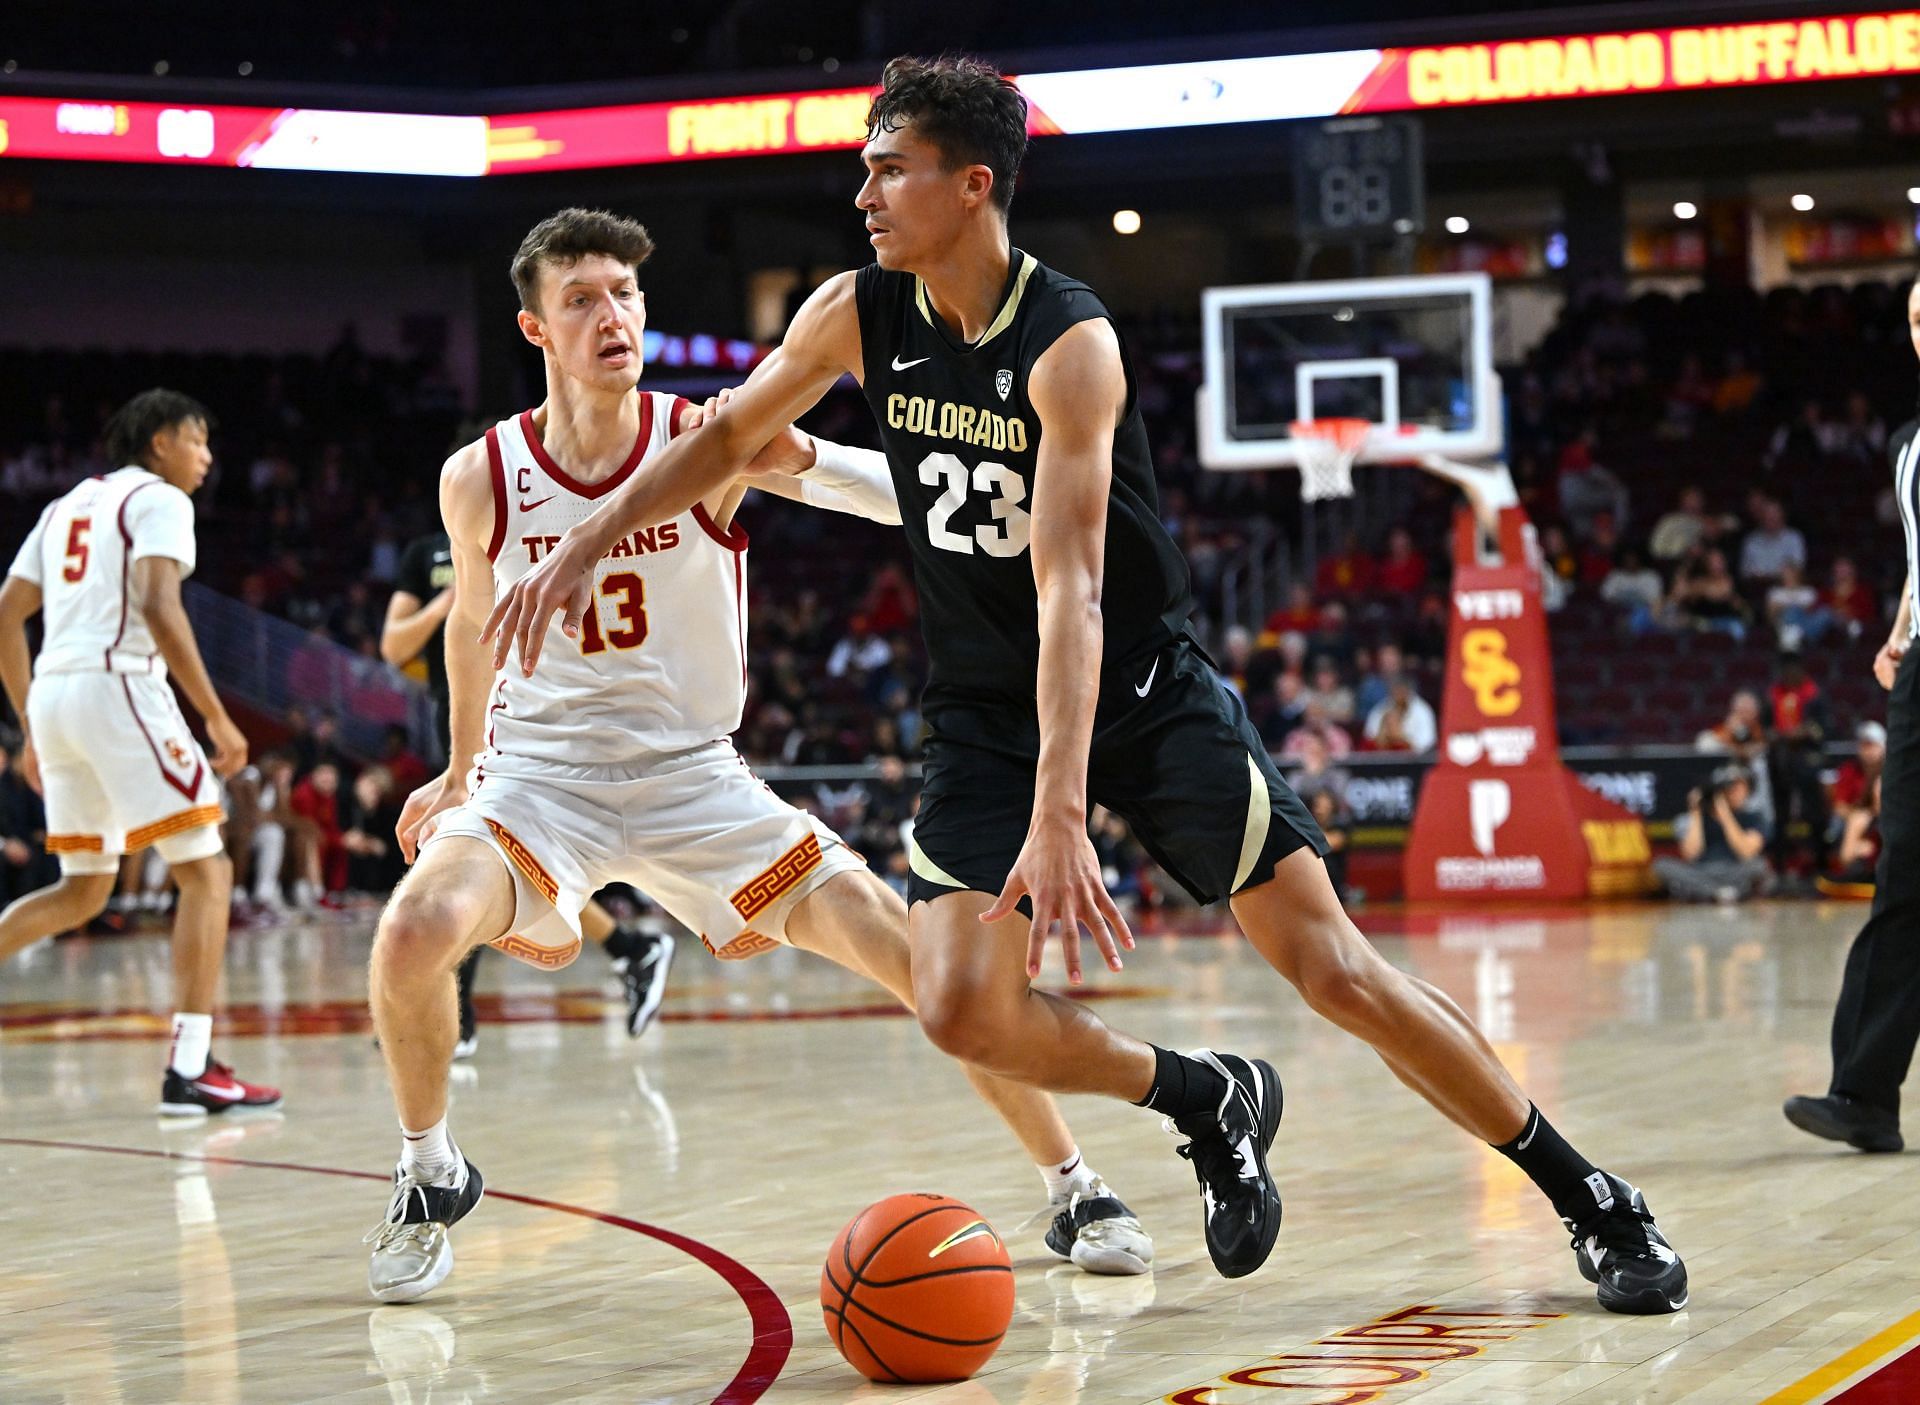 Colorado&#039;s Tristan Da Silva is one of the most versatile players in college basketball and is on a hot streak entering March Madness.